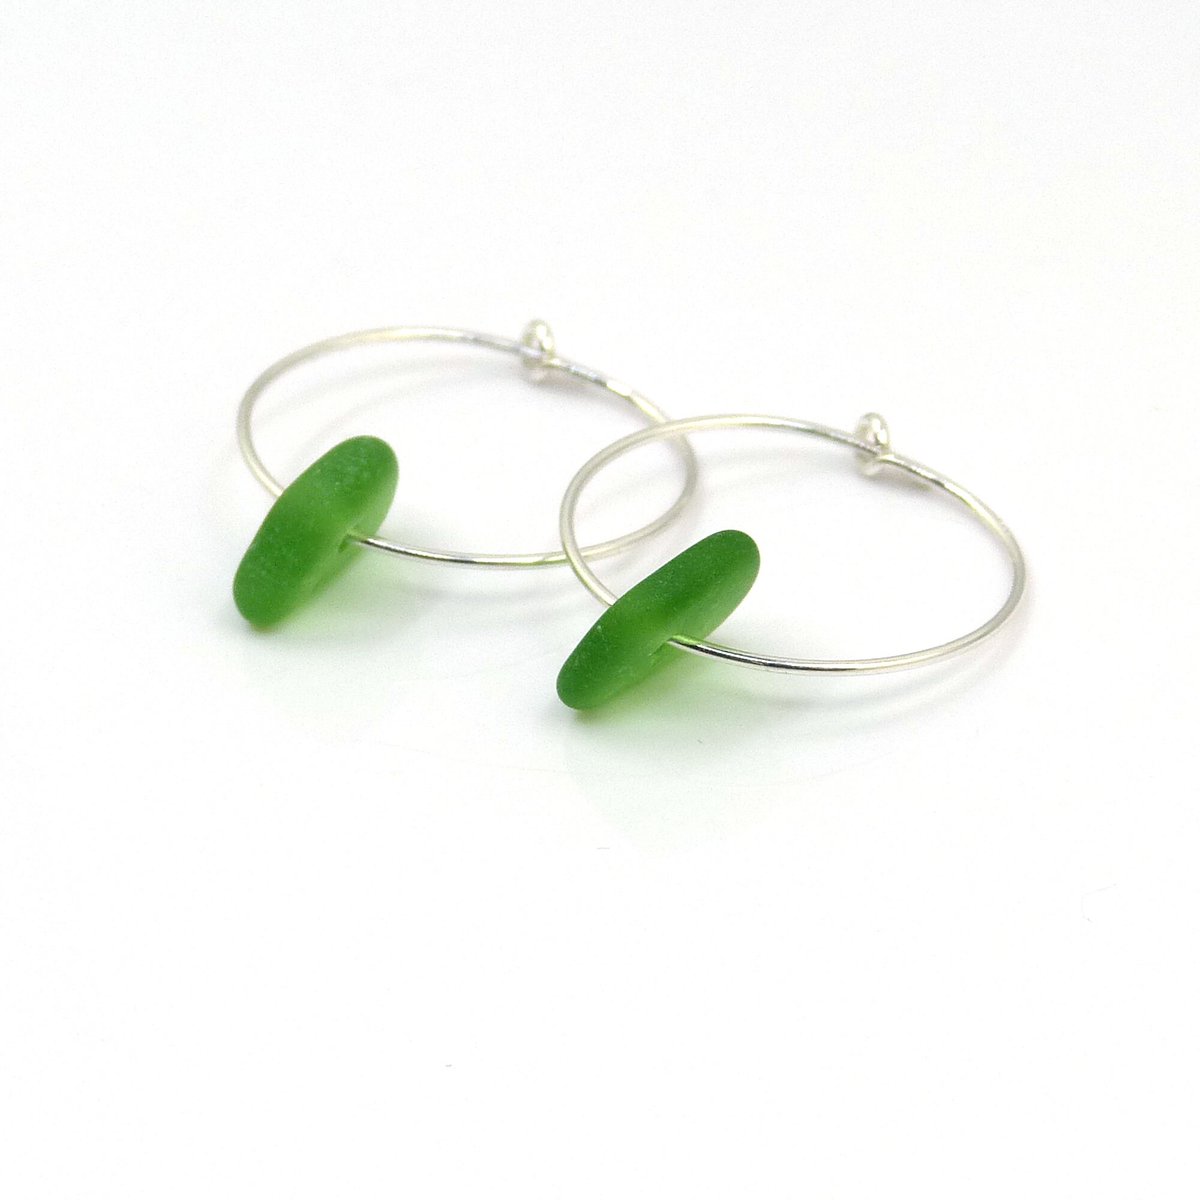 Seaham Emerald Green Sea Glass and Sterling Silver Hoop Earrings - Hoops available in 4 sizes - The Strandline tuppu.net/92b24acf #northumberland #thestrandline #EarlyBiz #shopindie #UKGiftHour #Etsy #supportsmallbusiness #SeaGlassHoops